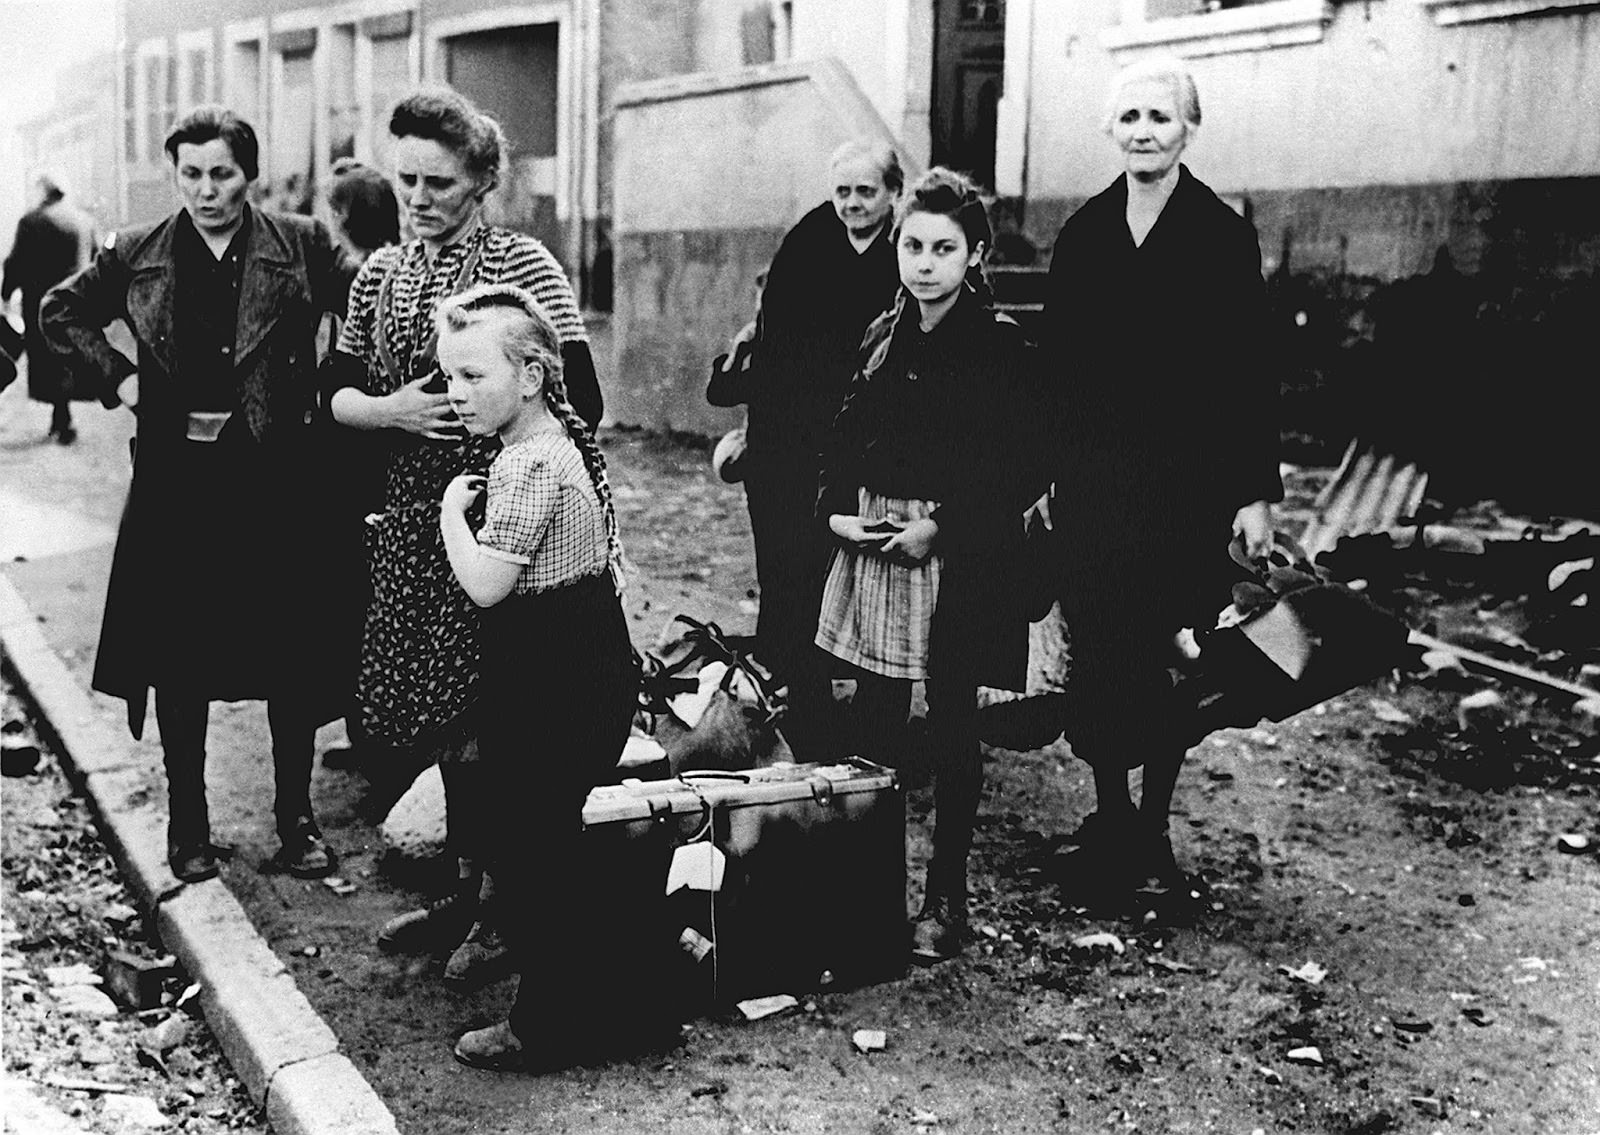 Women and children standing at the roadside in 1945.